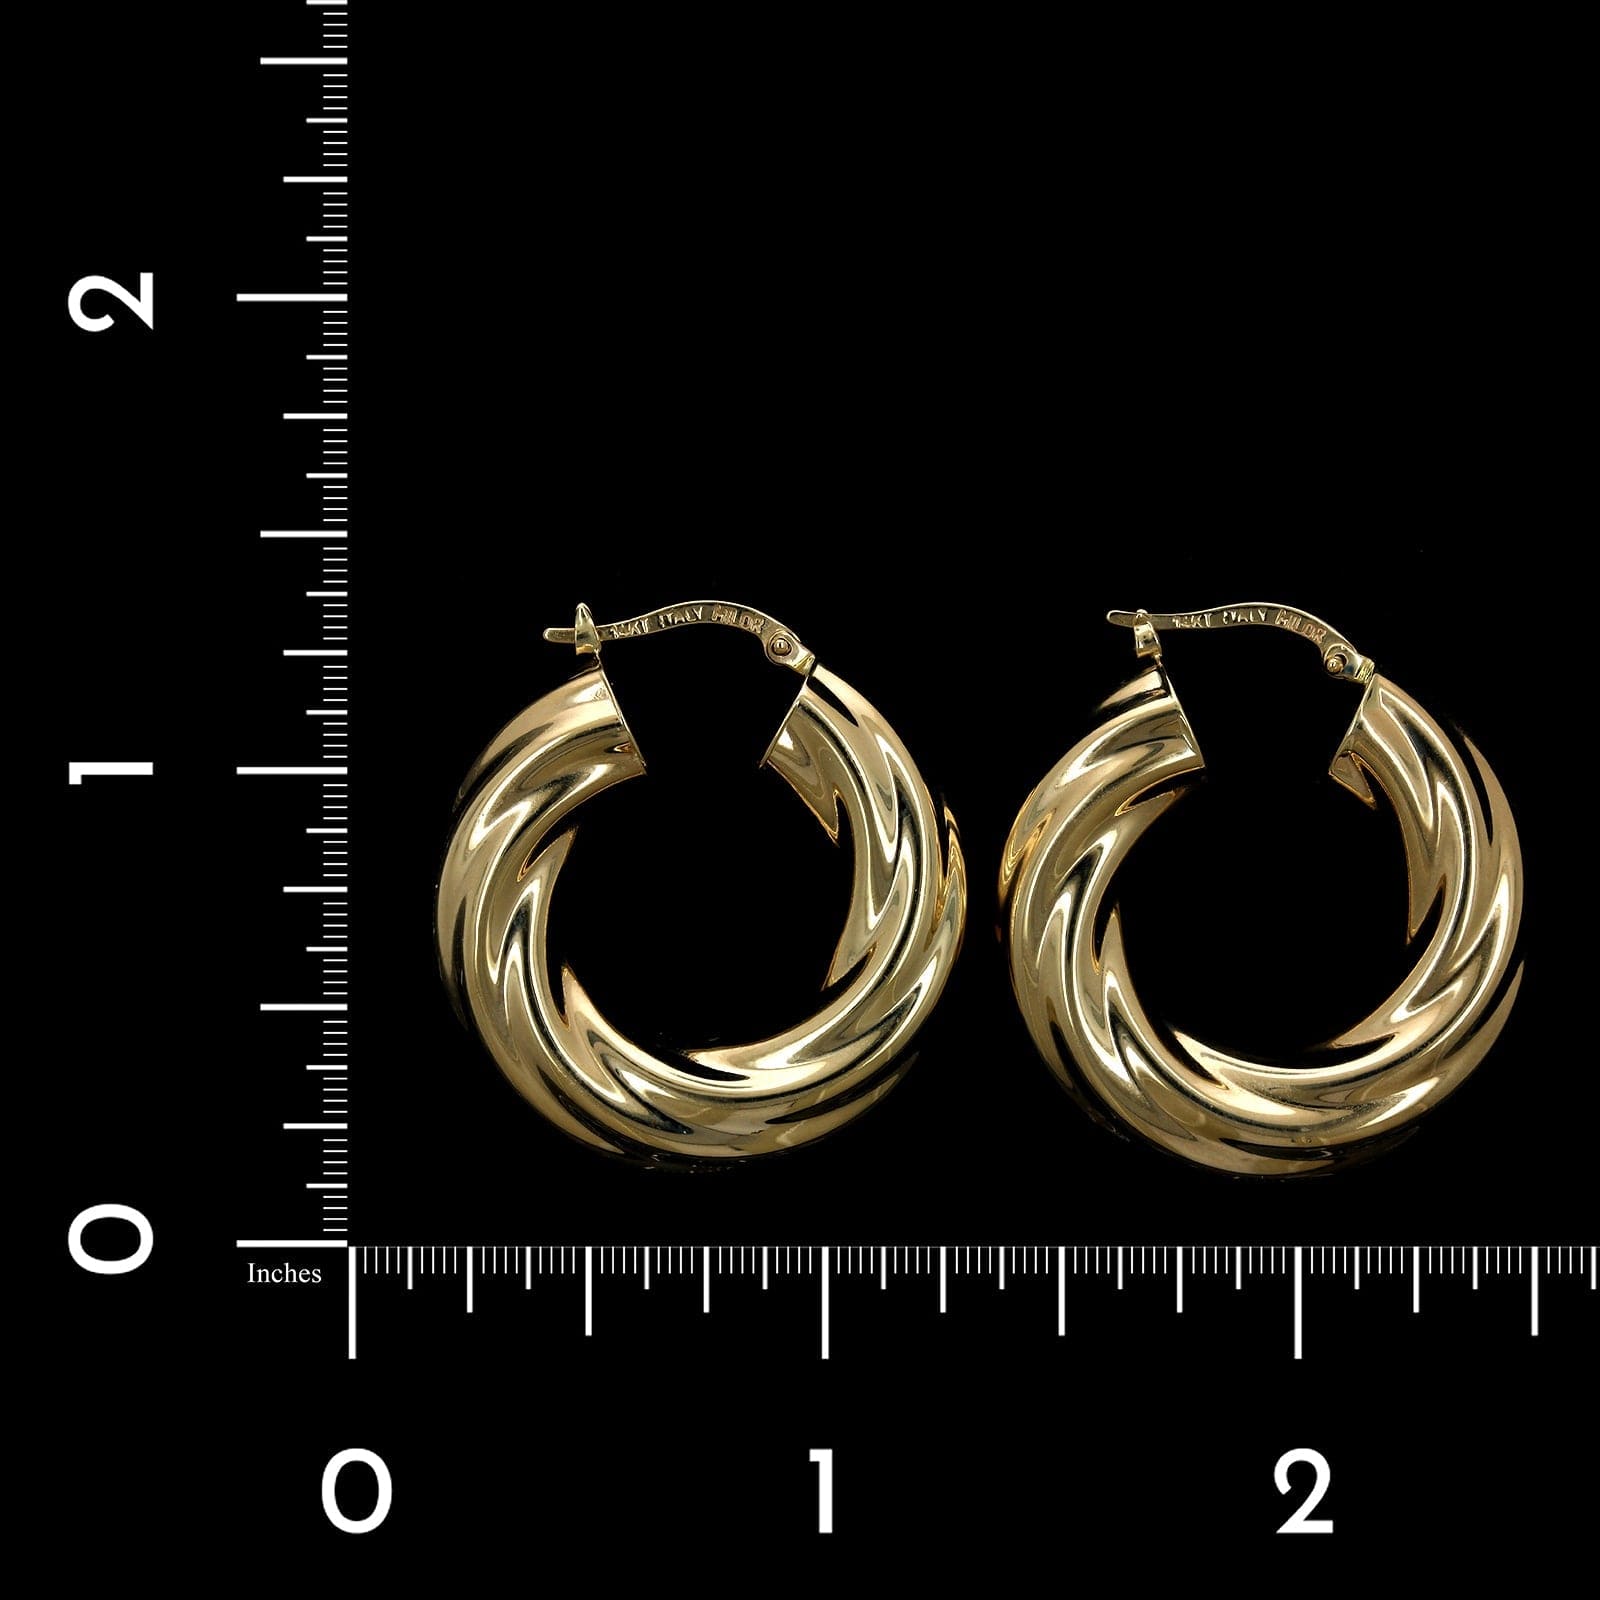 14K Yellow Gold Estate Twisted Hoop Earrings, 14k yellow gold, Long's Jewelers